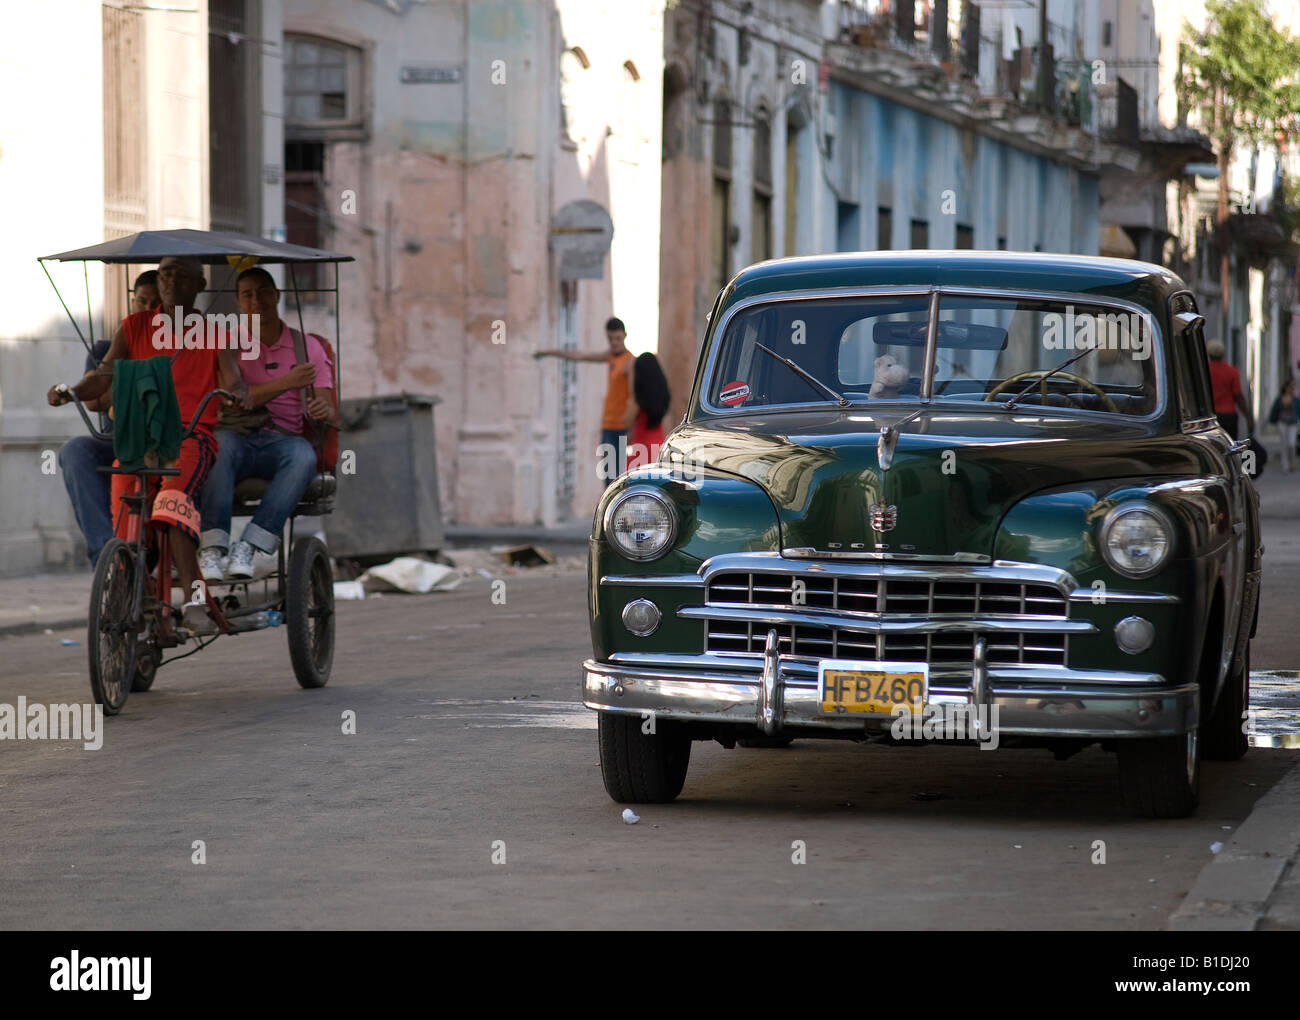 Old american car and bicitaxi in Habana Centro Stock Photo